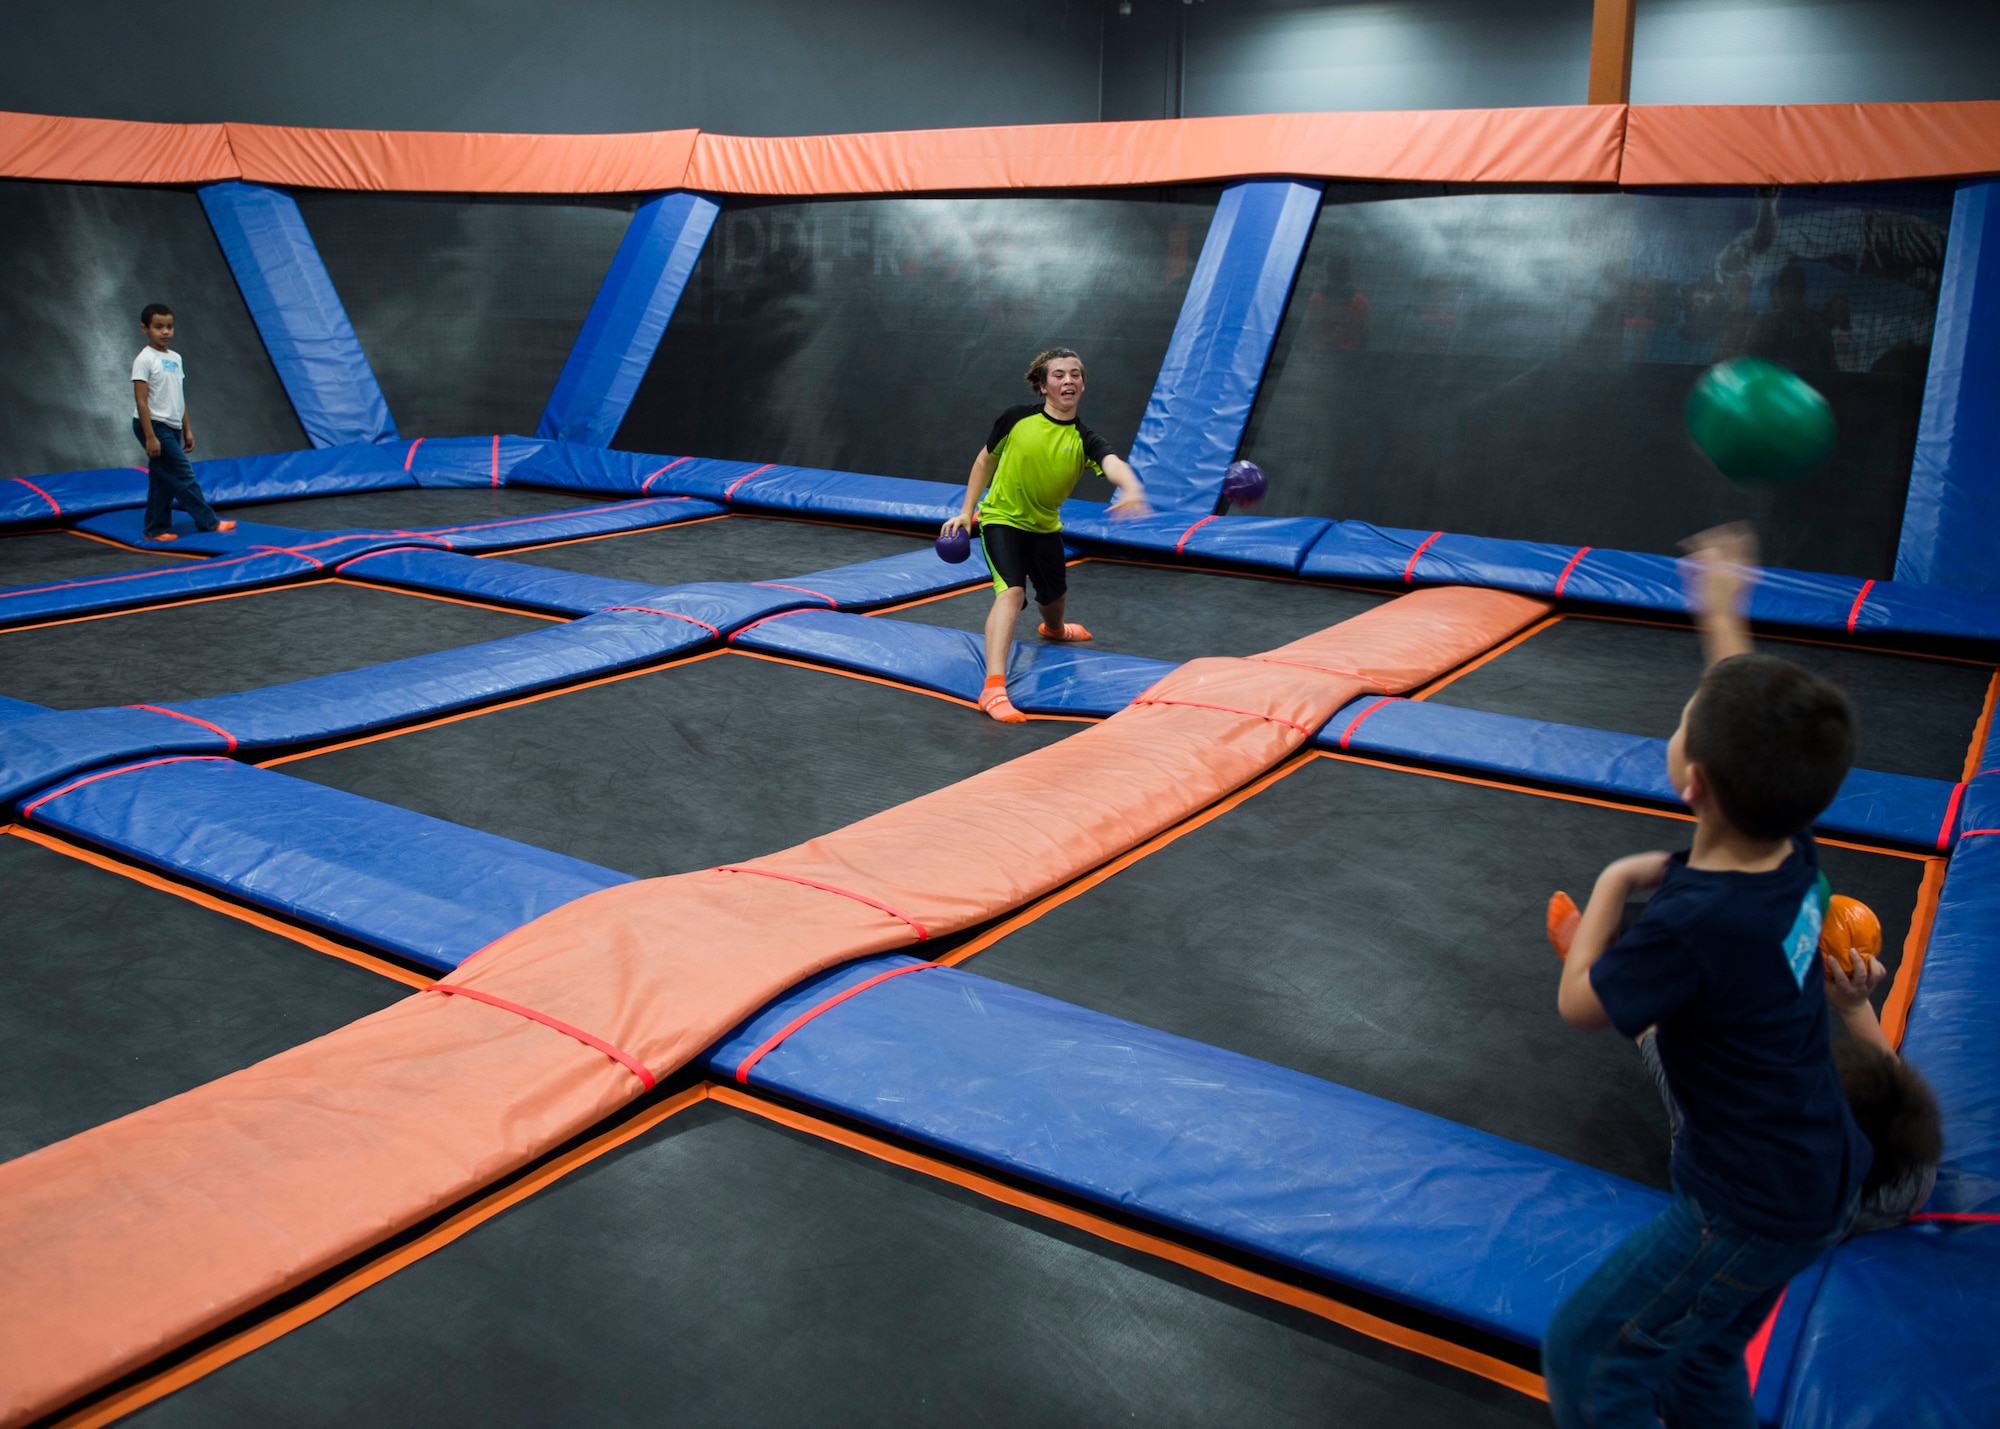 Families of deployed Air Commandos play dodgeball during a Hearts Apart event at the Sky Zone in Pensacola, Fla., Jan. 28, 2017. Hearts Apart is a program through the Hurlburt Field Airman and Family Readiness Center that connects spouses and loved ones of deployed Air Commandos to encourage support systems. (U.S. Air Force photo by Senior Airman Krystal M. Garrett)